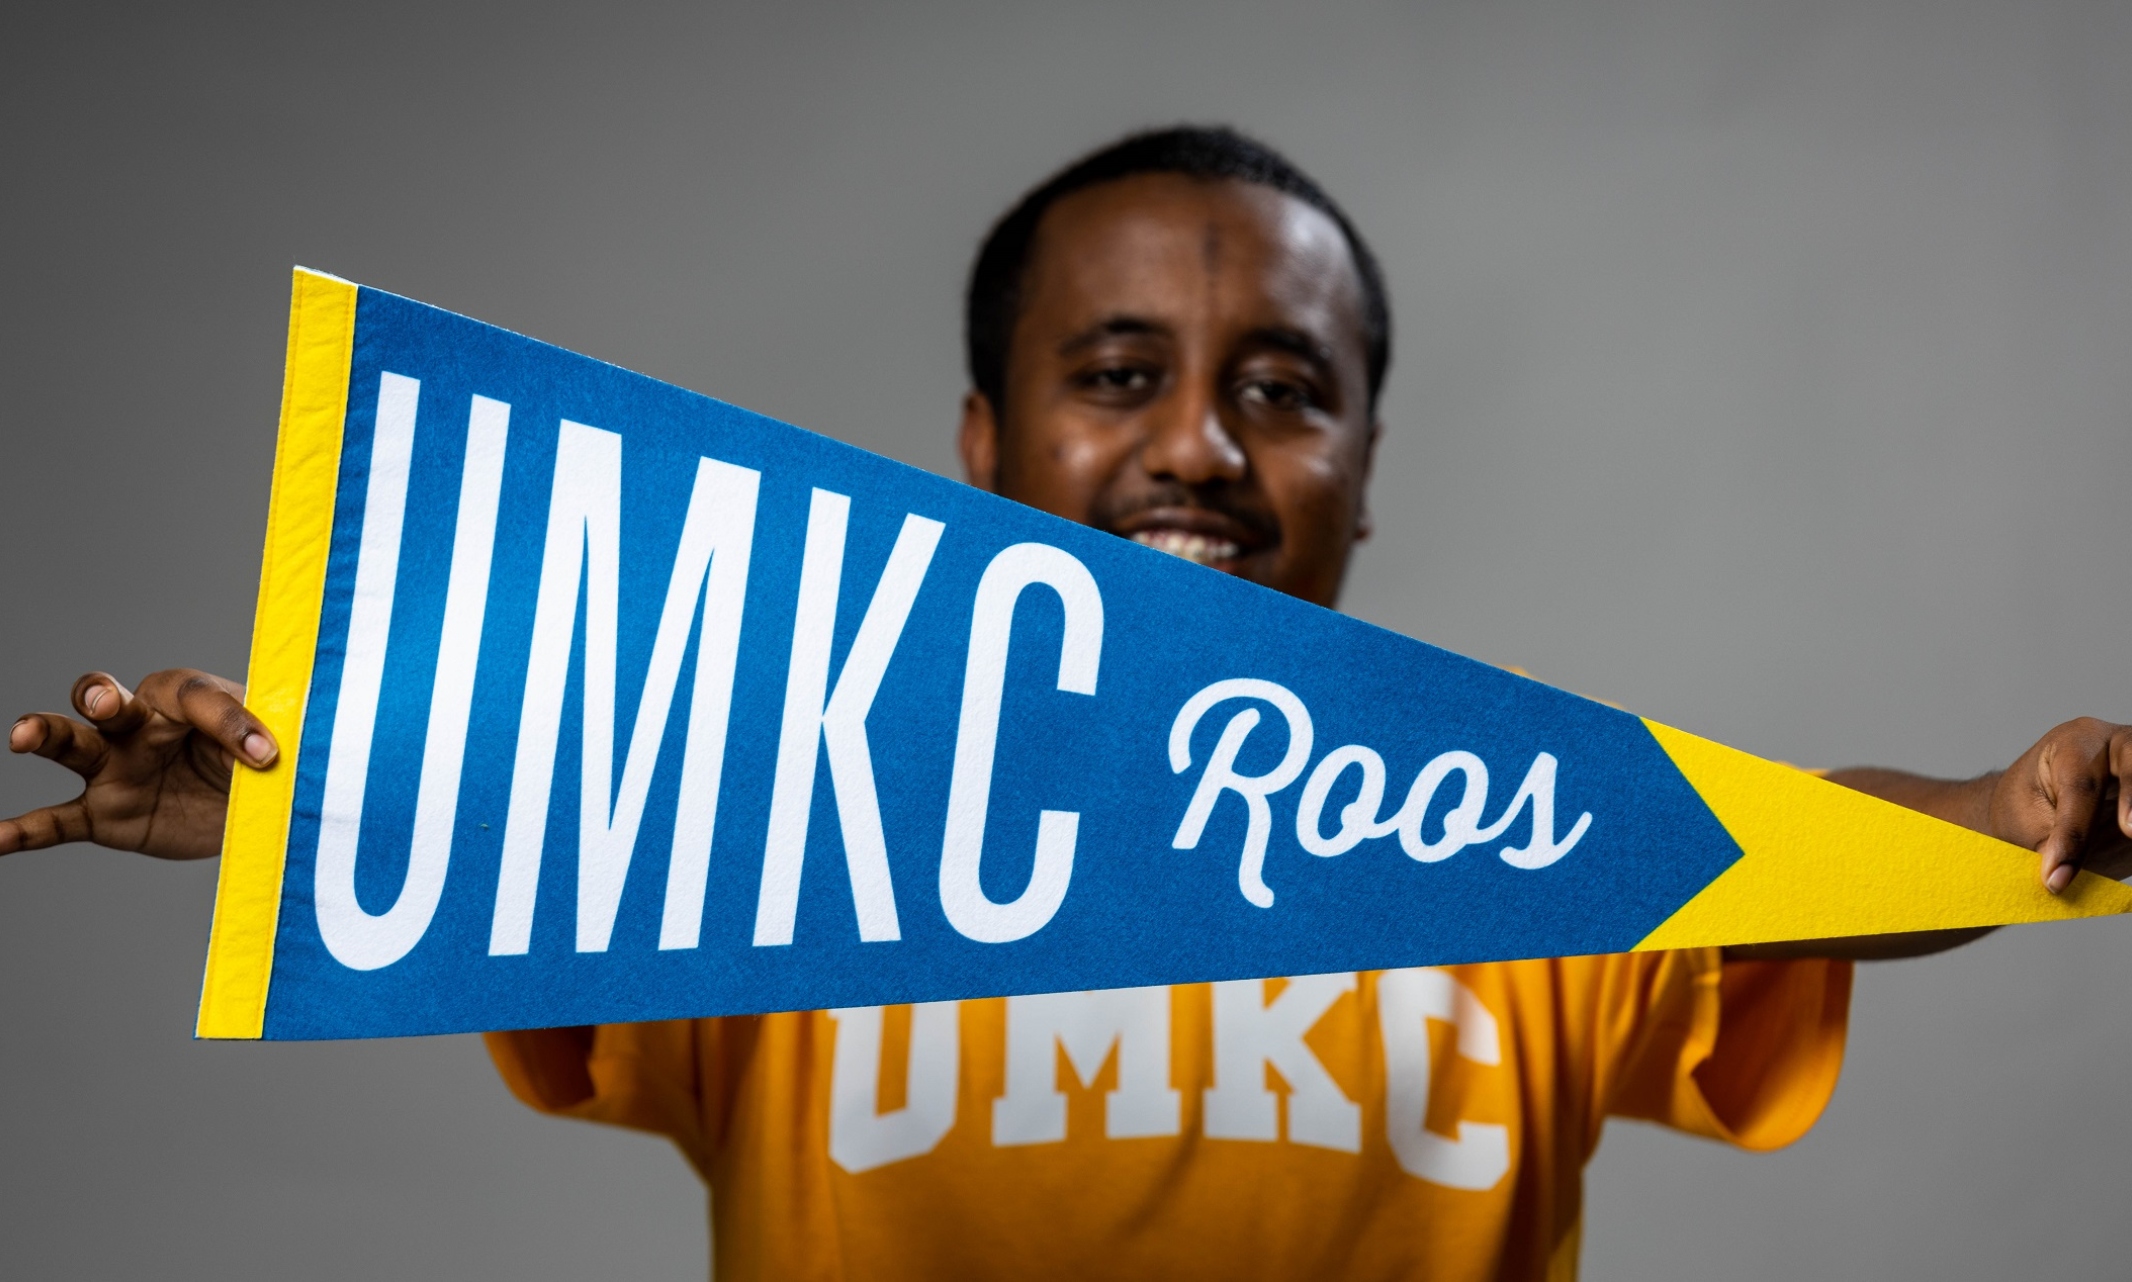 Transfer student Nabil Abas holds a UMKC pennant in the forefront of the frame